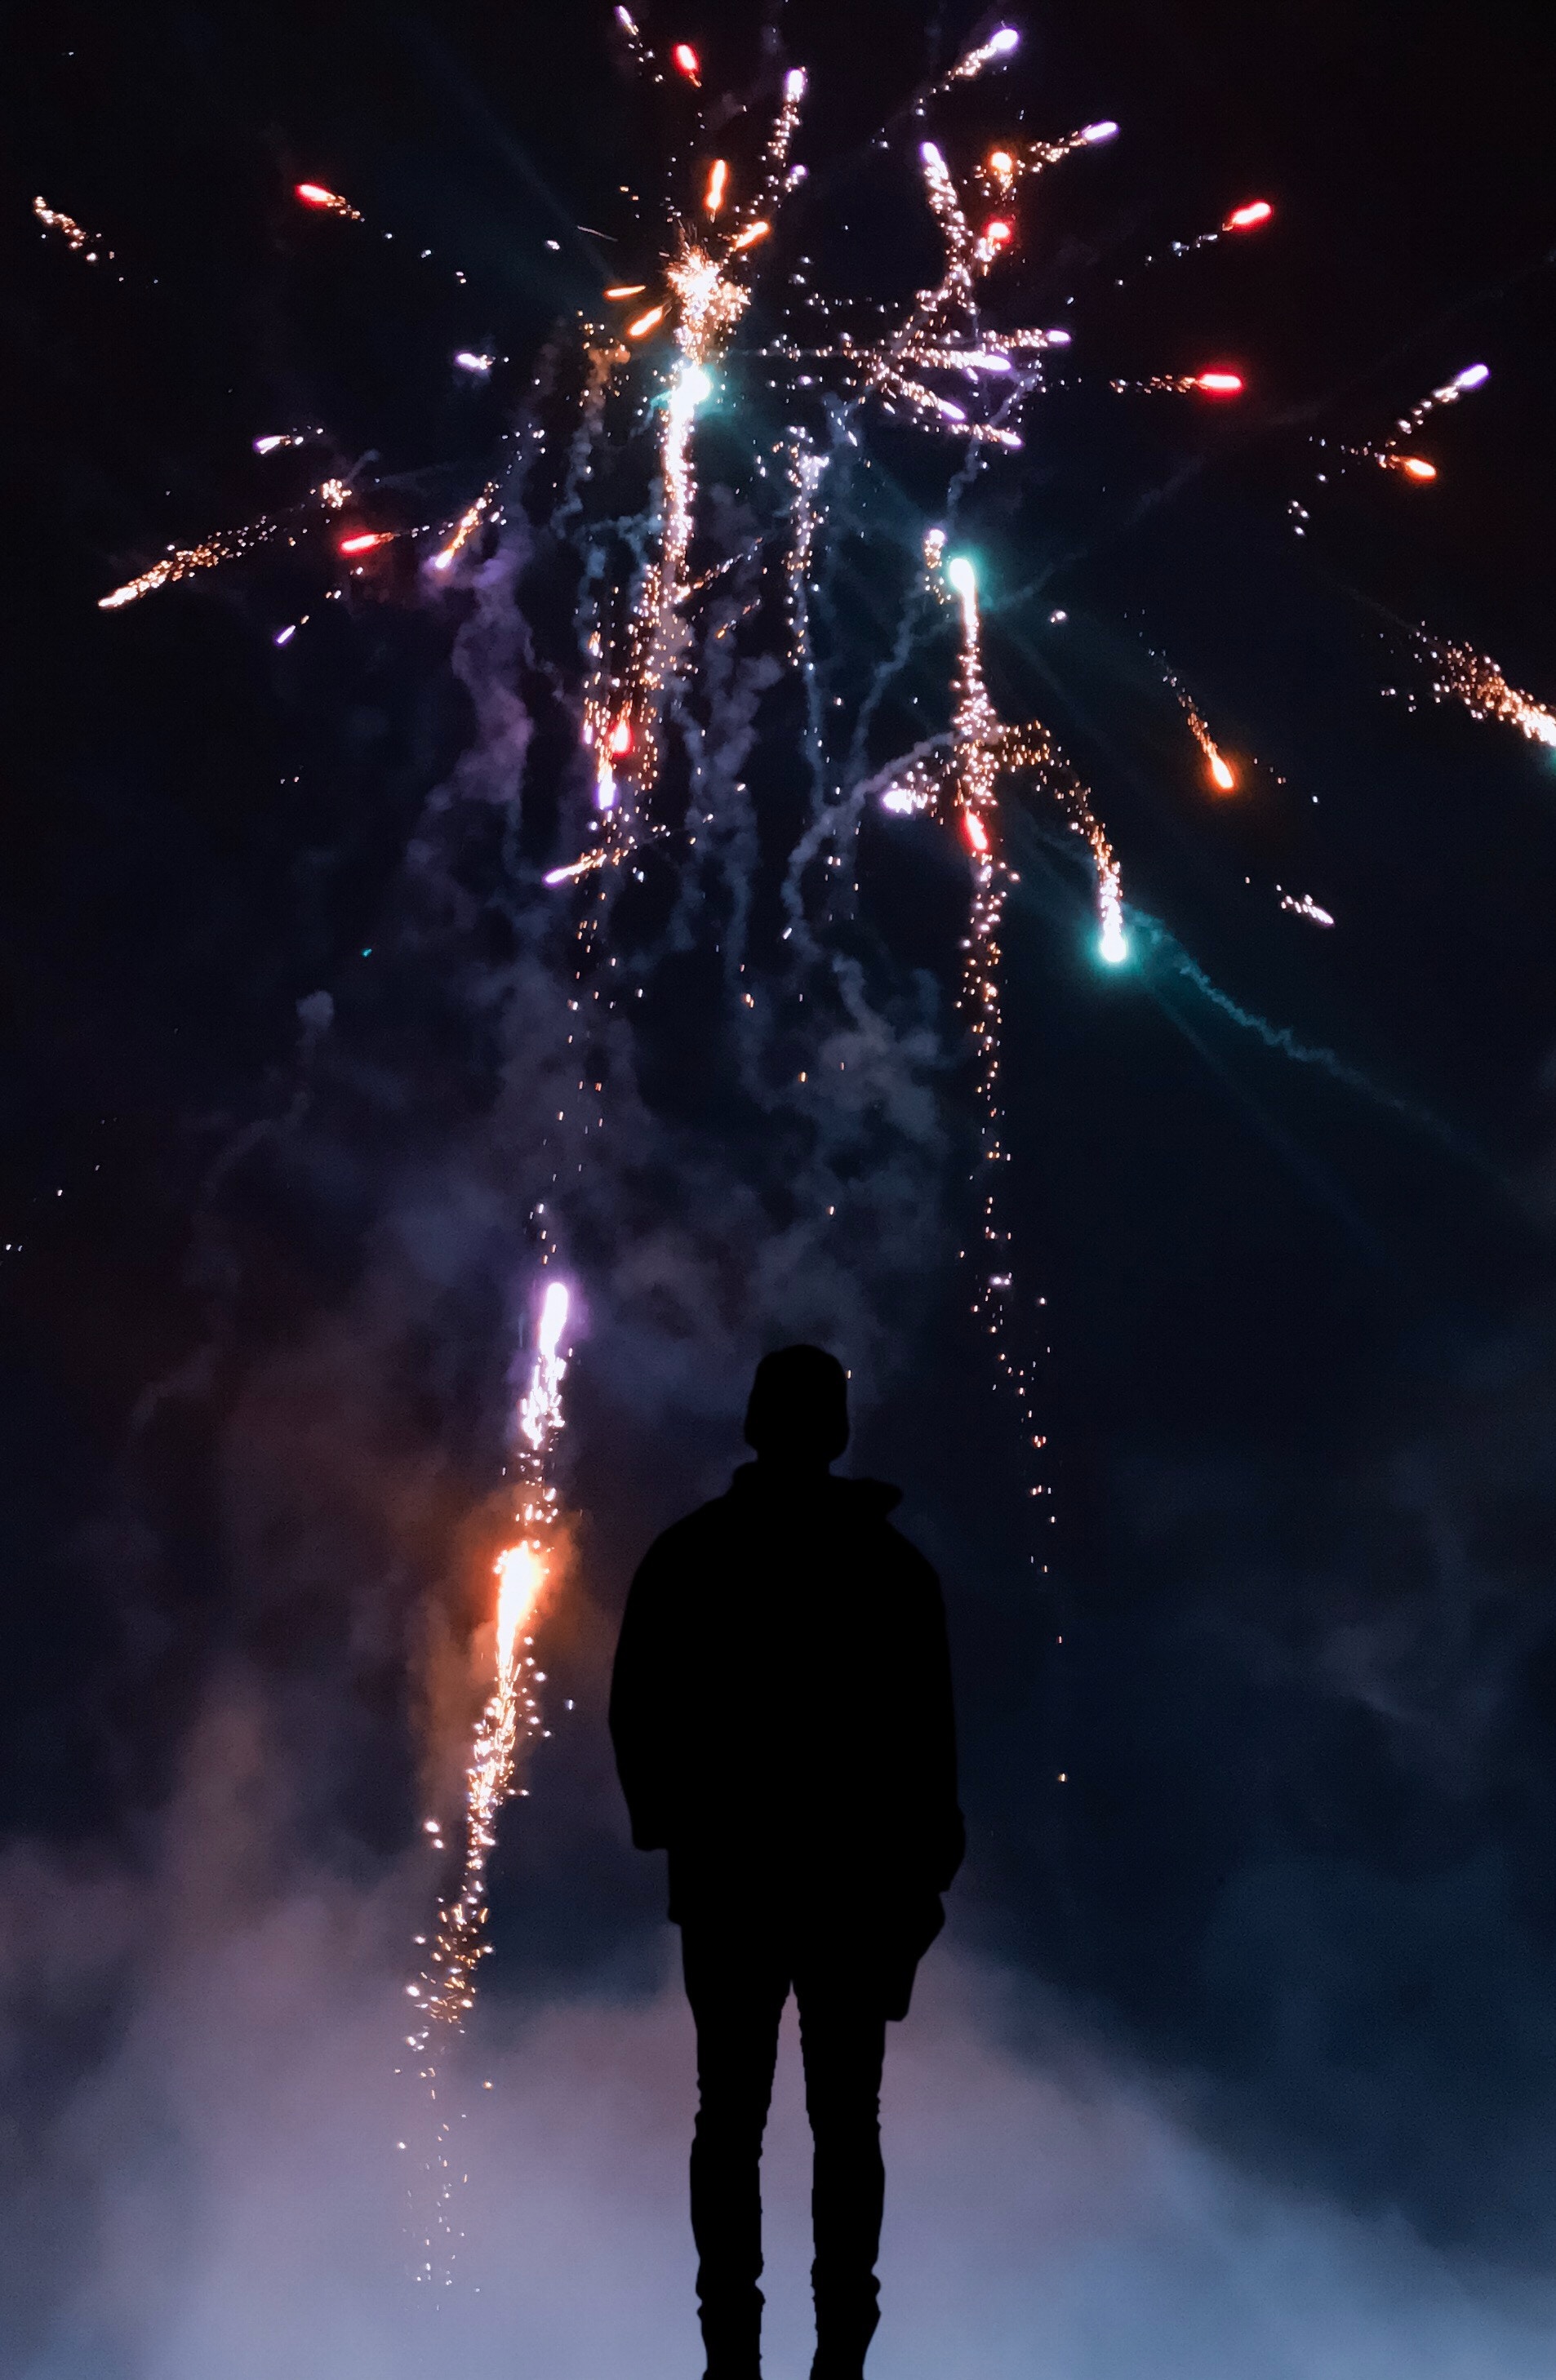 1080p Firework Hd Images